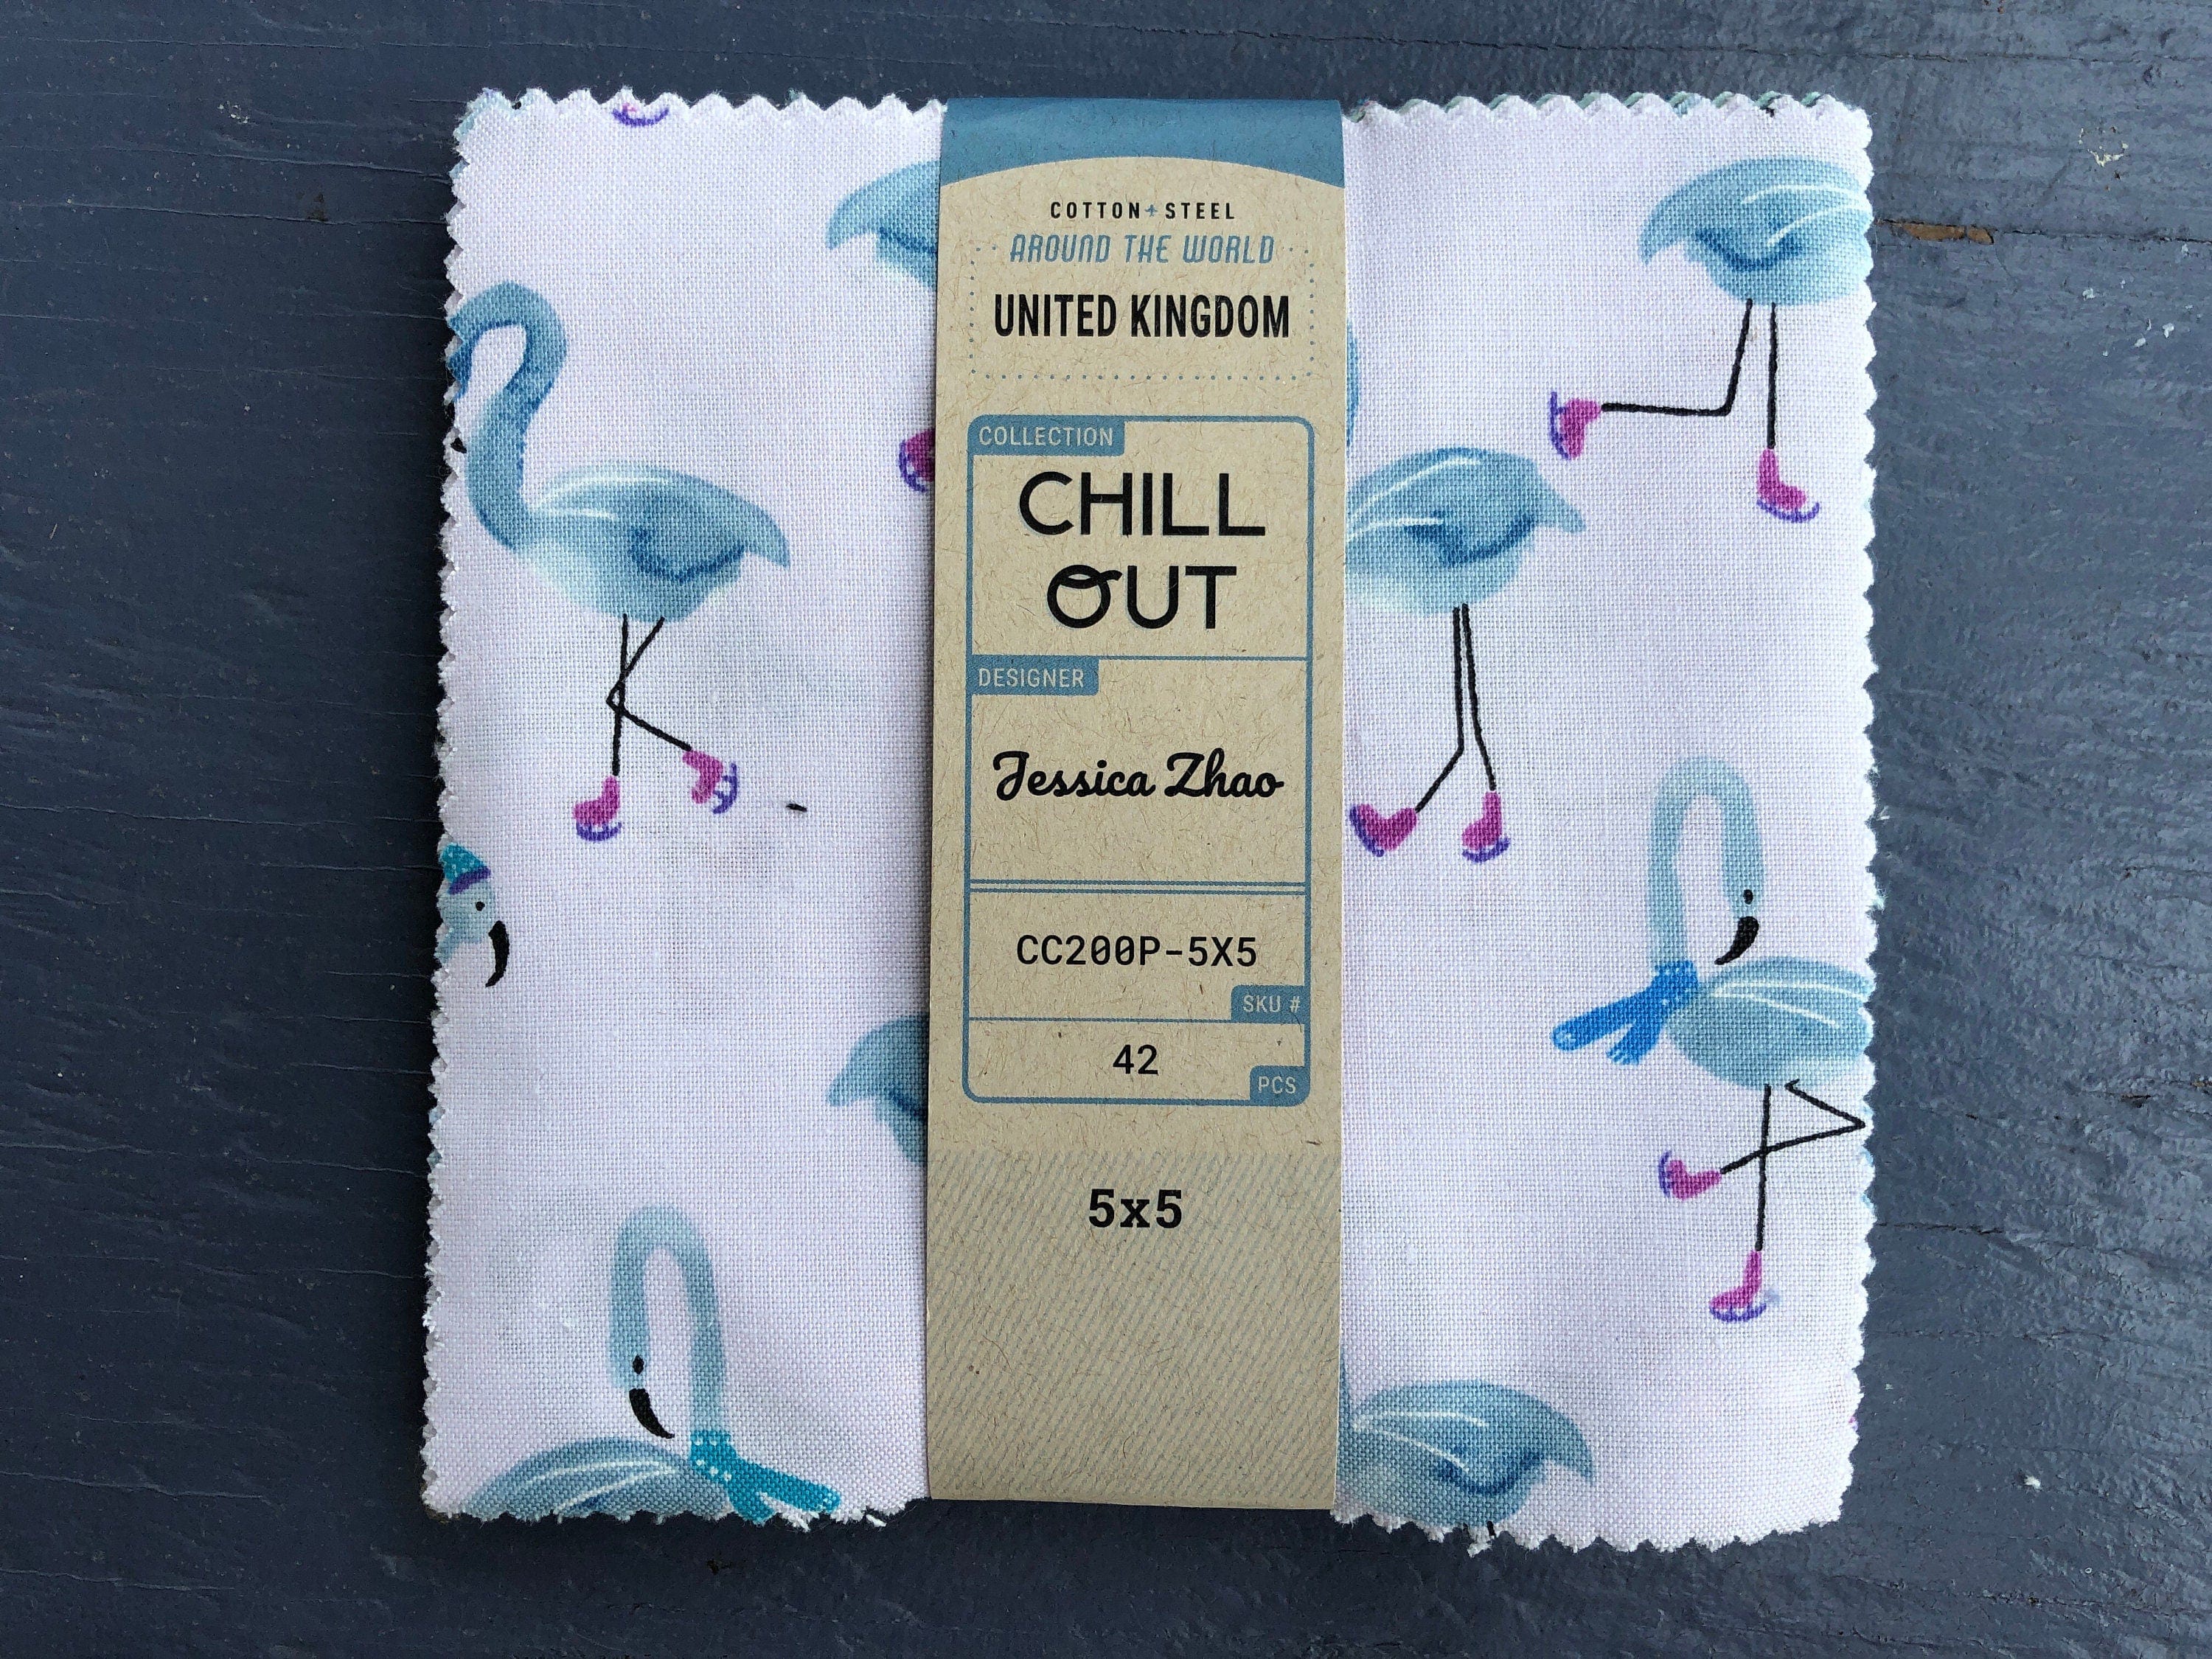 Chill Out - Around the World - United Kingdom - Jessica Zhao - Cotton + Steel - Blue - Purple - Pink - CC200P-5X5